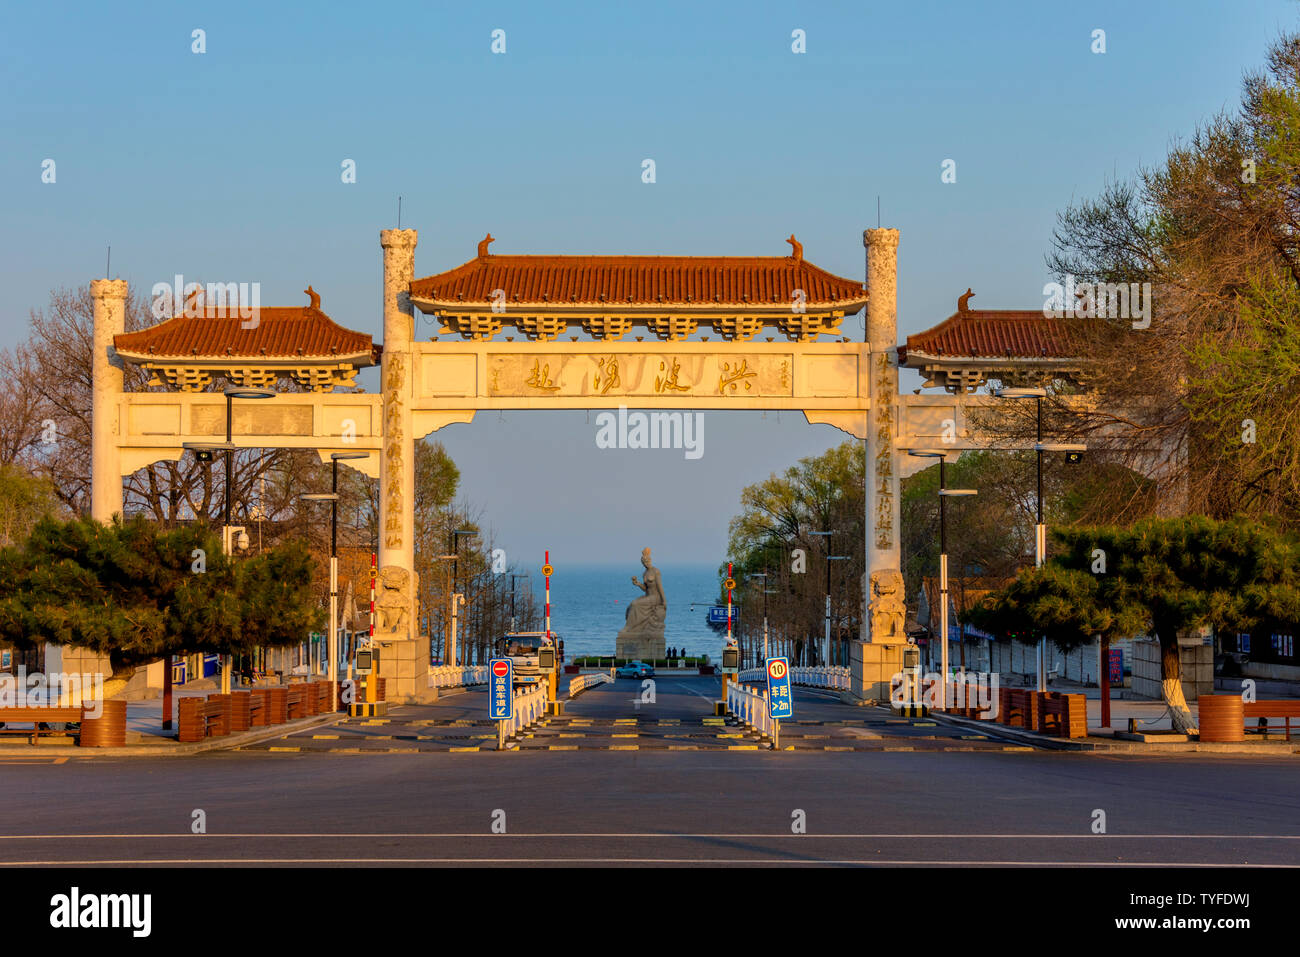 Huludao Liaoning Xingcheng Station Scenic Area Banque D'Images